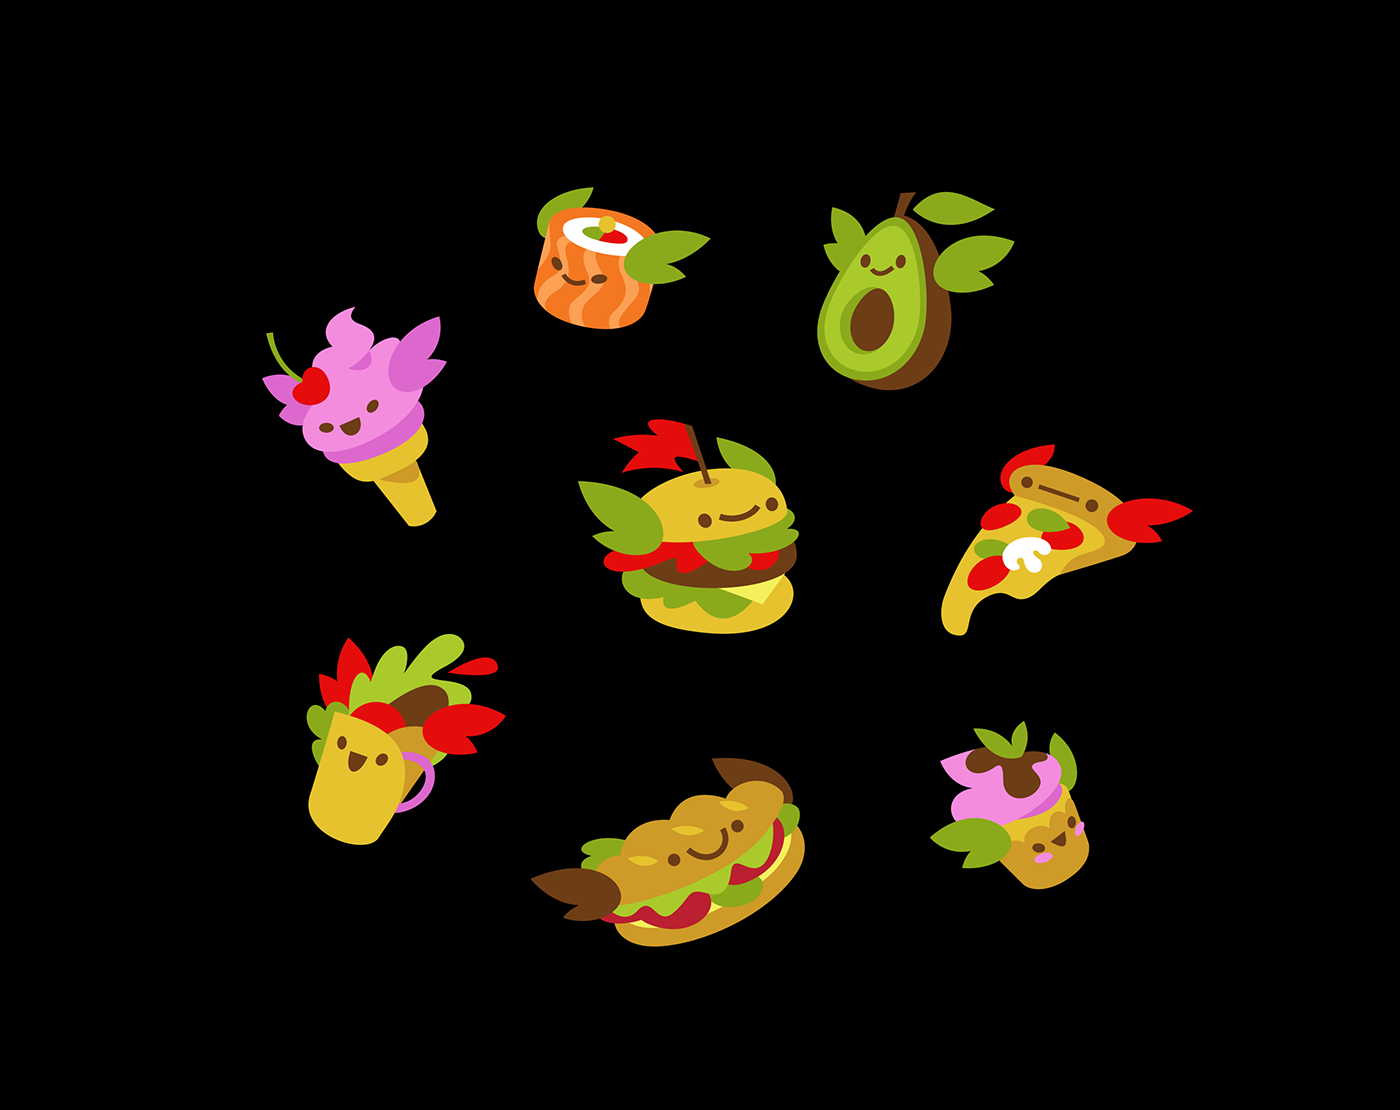 Food characters for use in social media